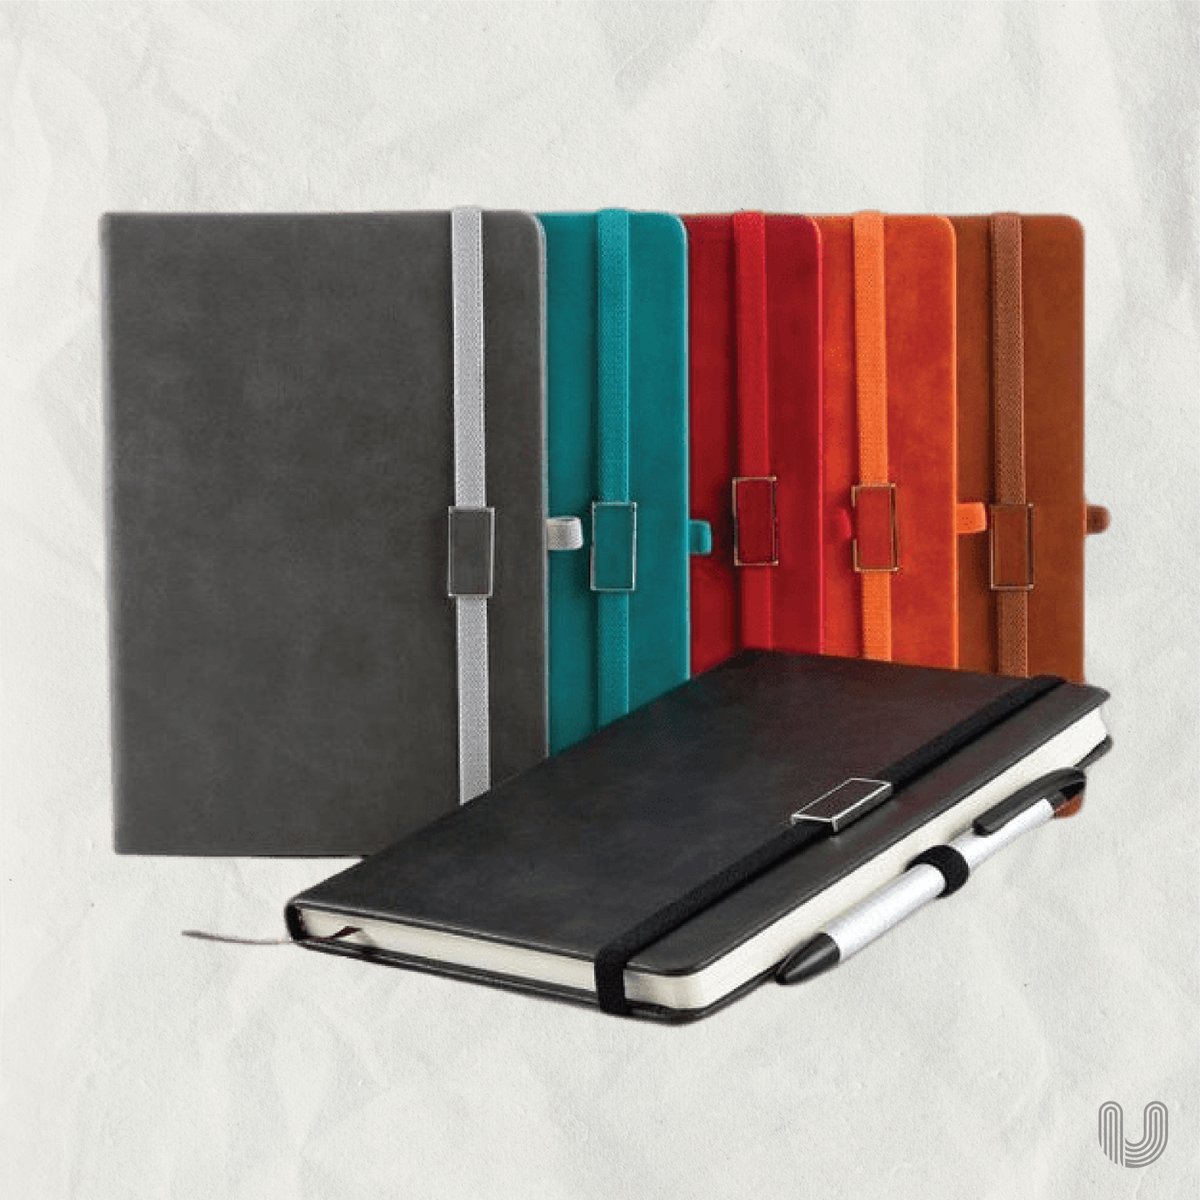 'Inject some vibrant vibes into office life with these colourful notebooks! 🎨 Perfect as corporate gifts that'll brighten everyone's day! '

#OfficeRainbows #CorporateSwag #NotebookAddict #ColourfulGifts #CreativeOfficeEssentials